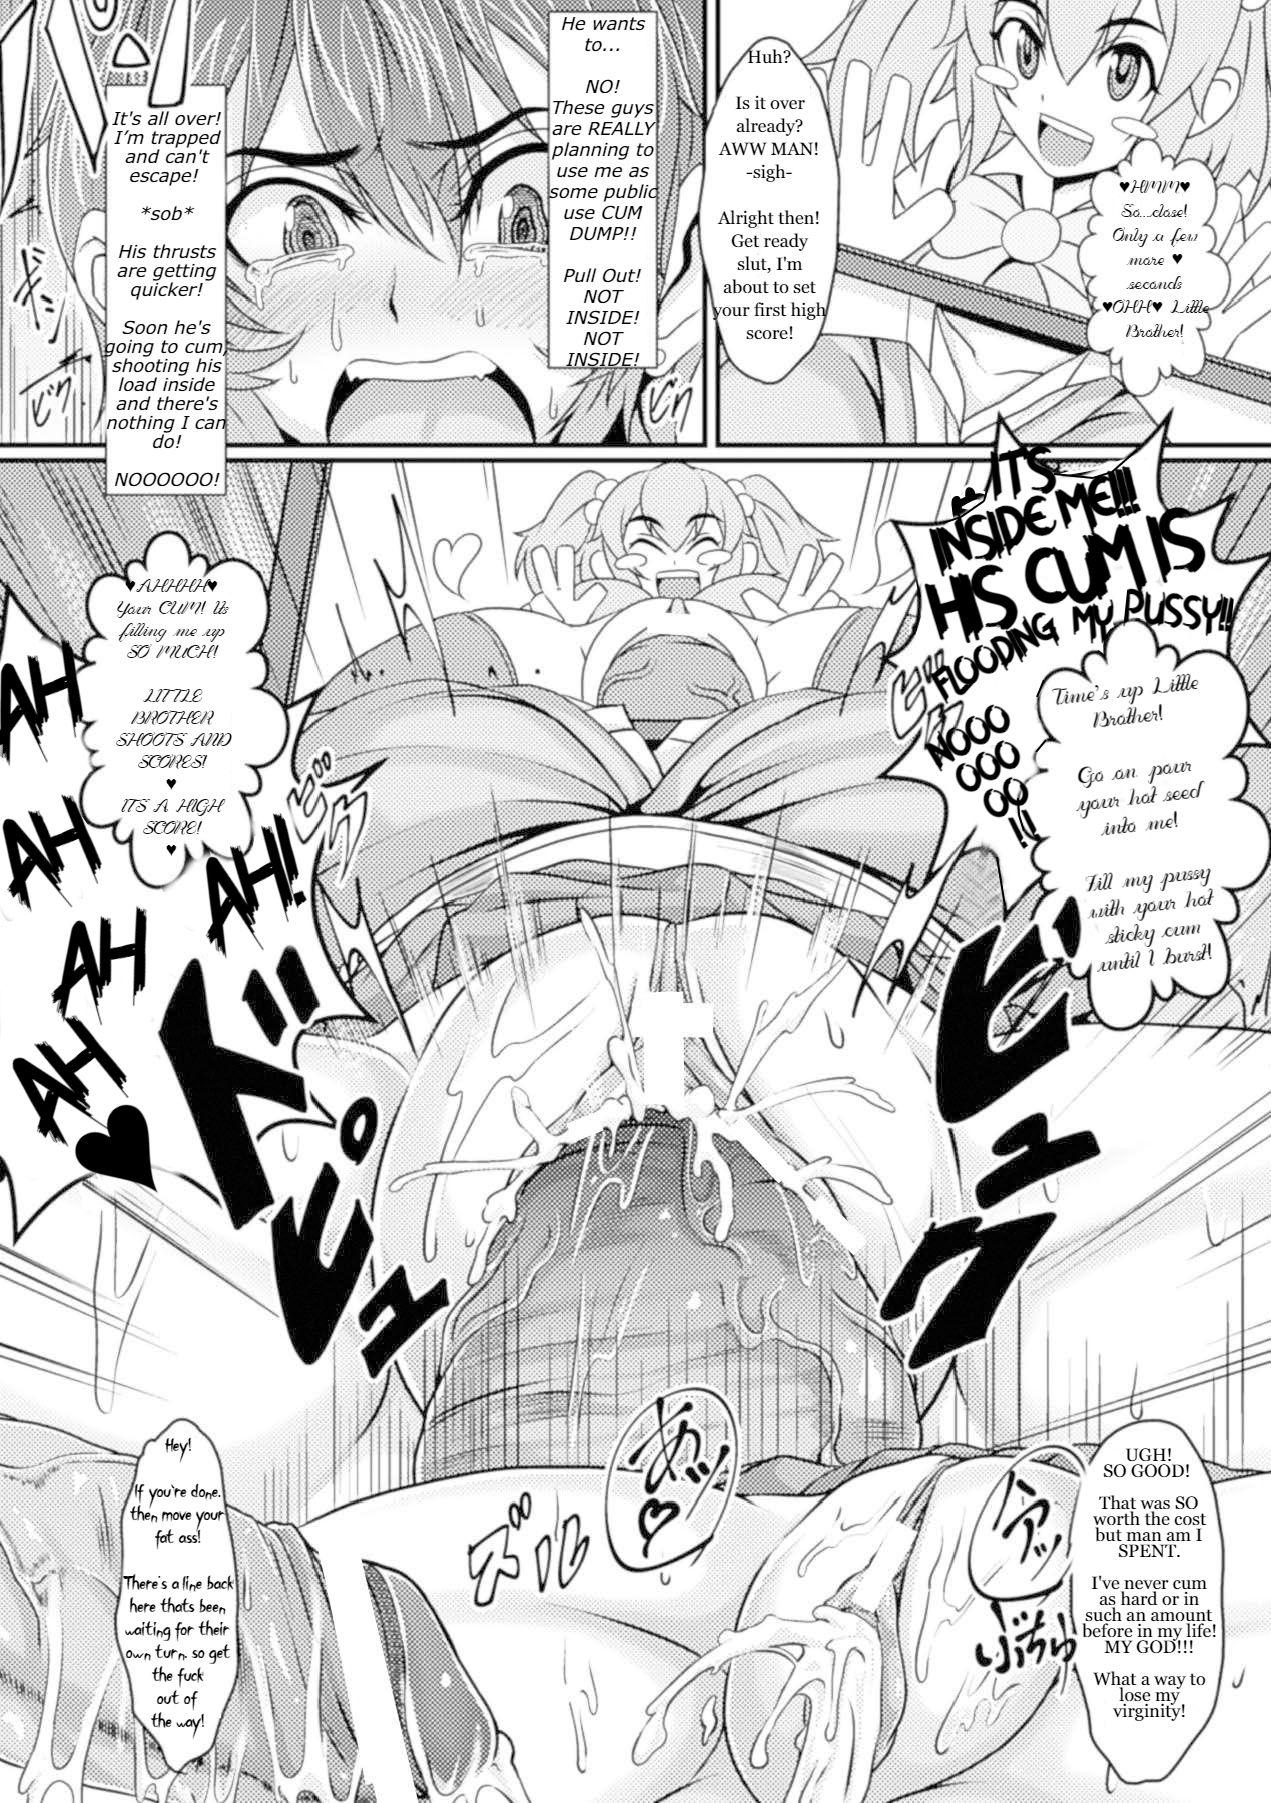 Hoe Game Center no Ura Jijou | Behind the Scenes at the Game Center Spoon - Page 8